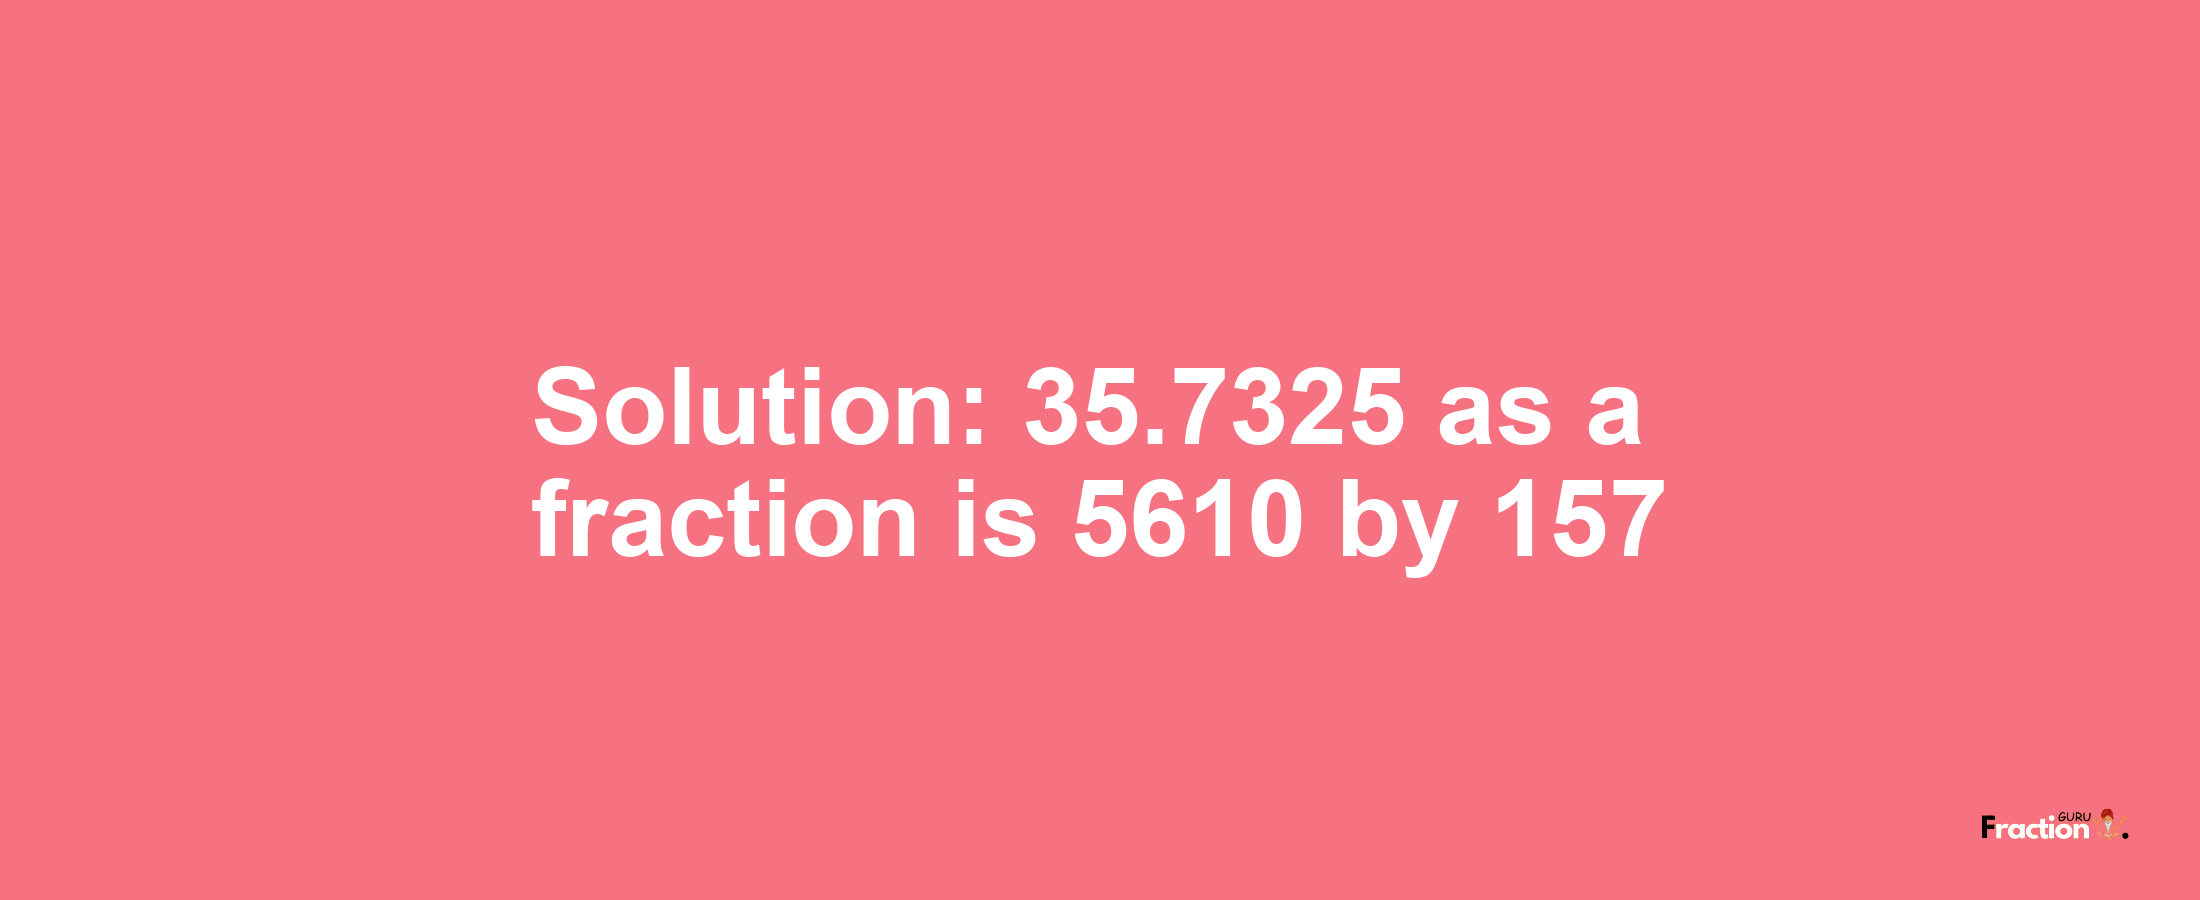 Solution:35.7325 as a fraction is 5610/157